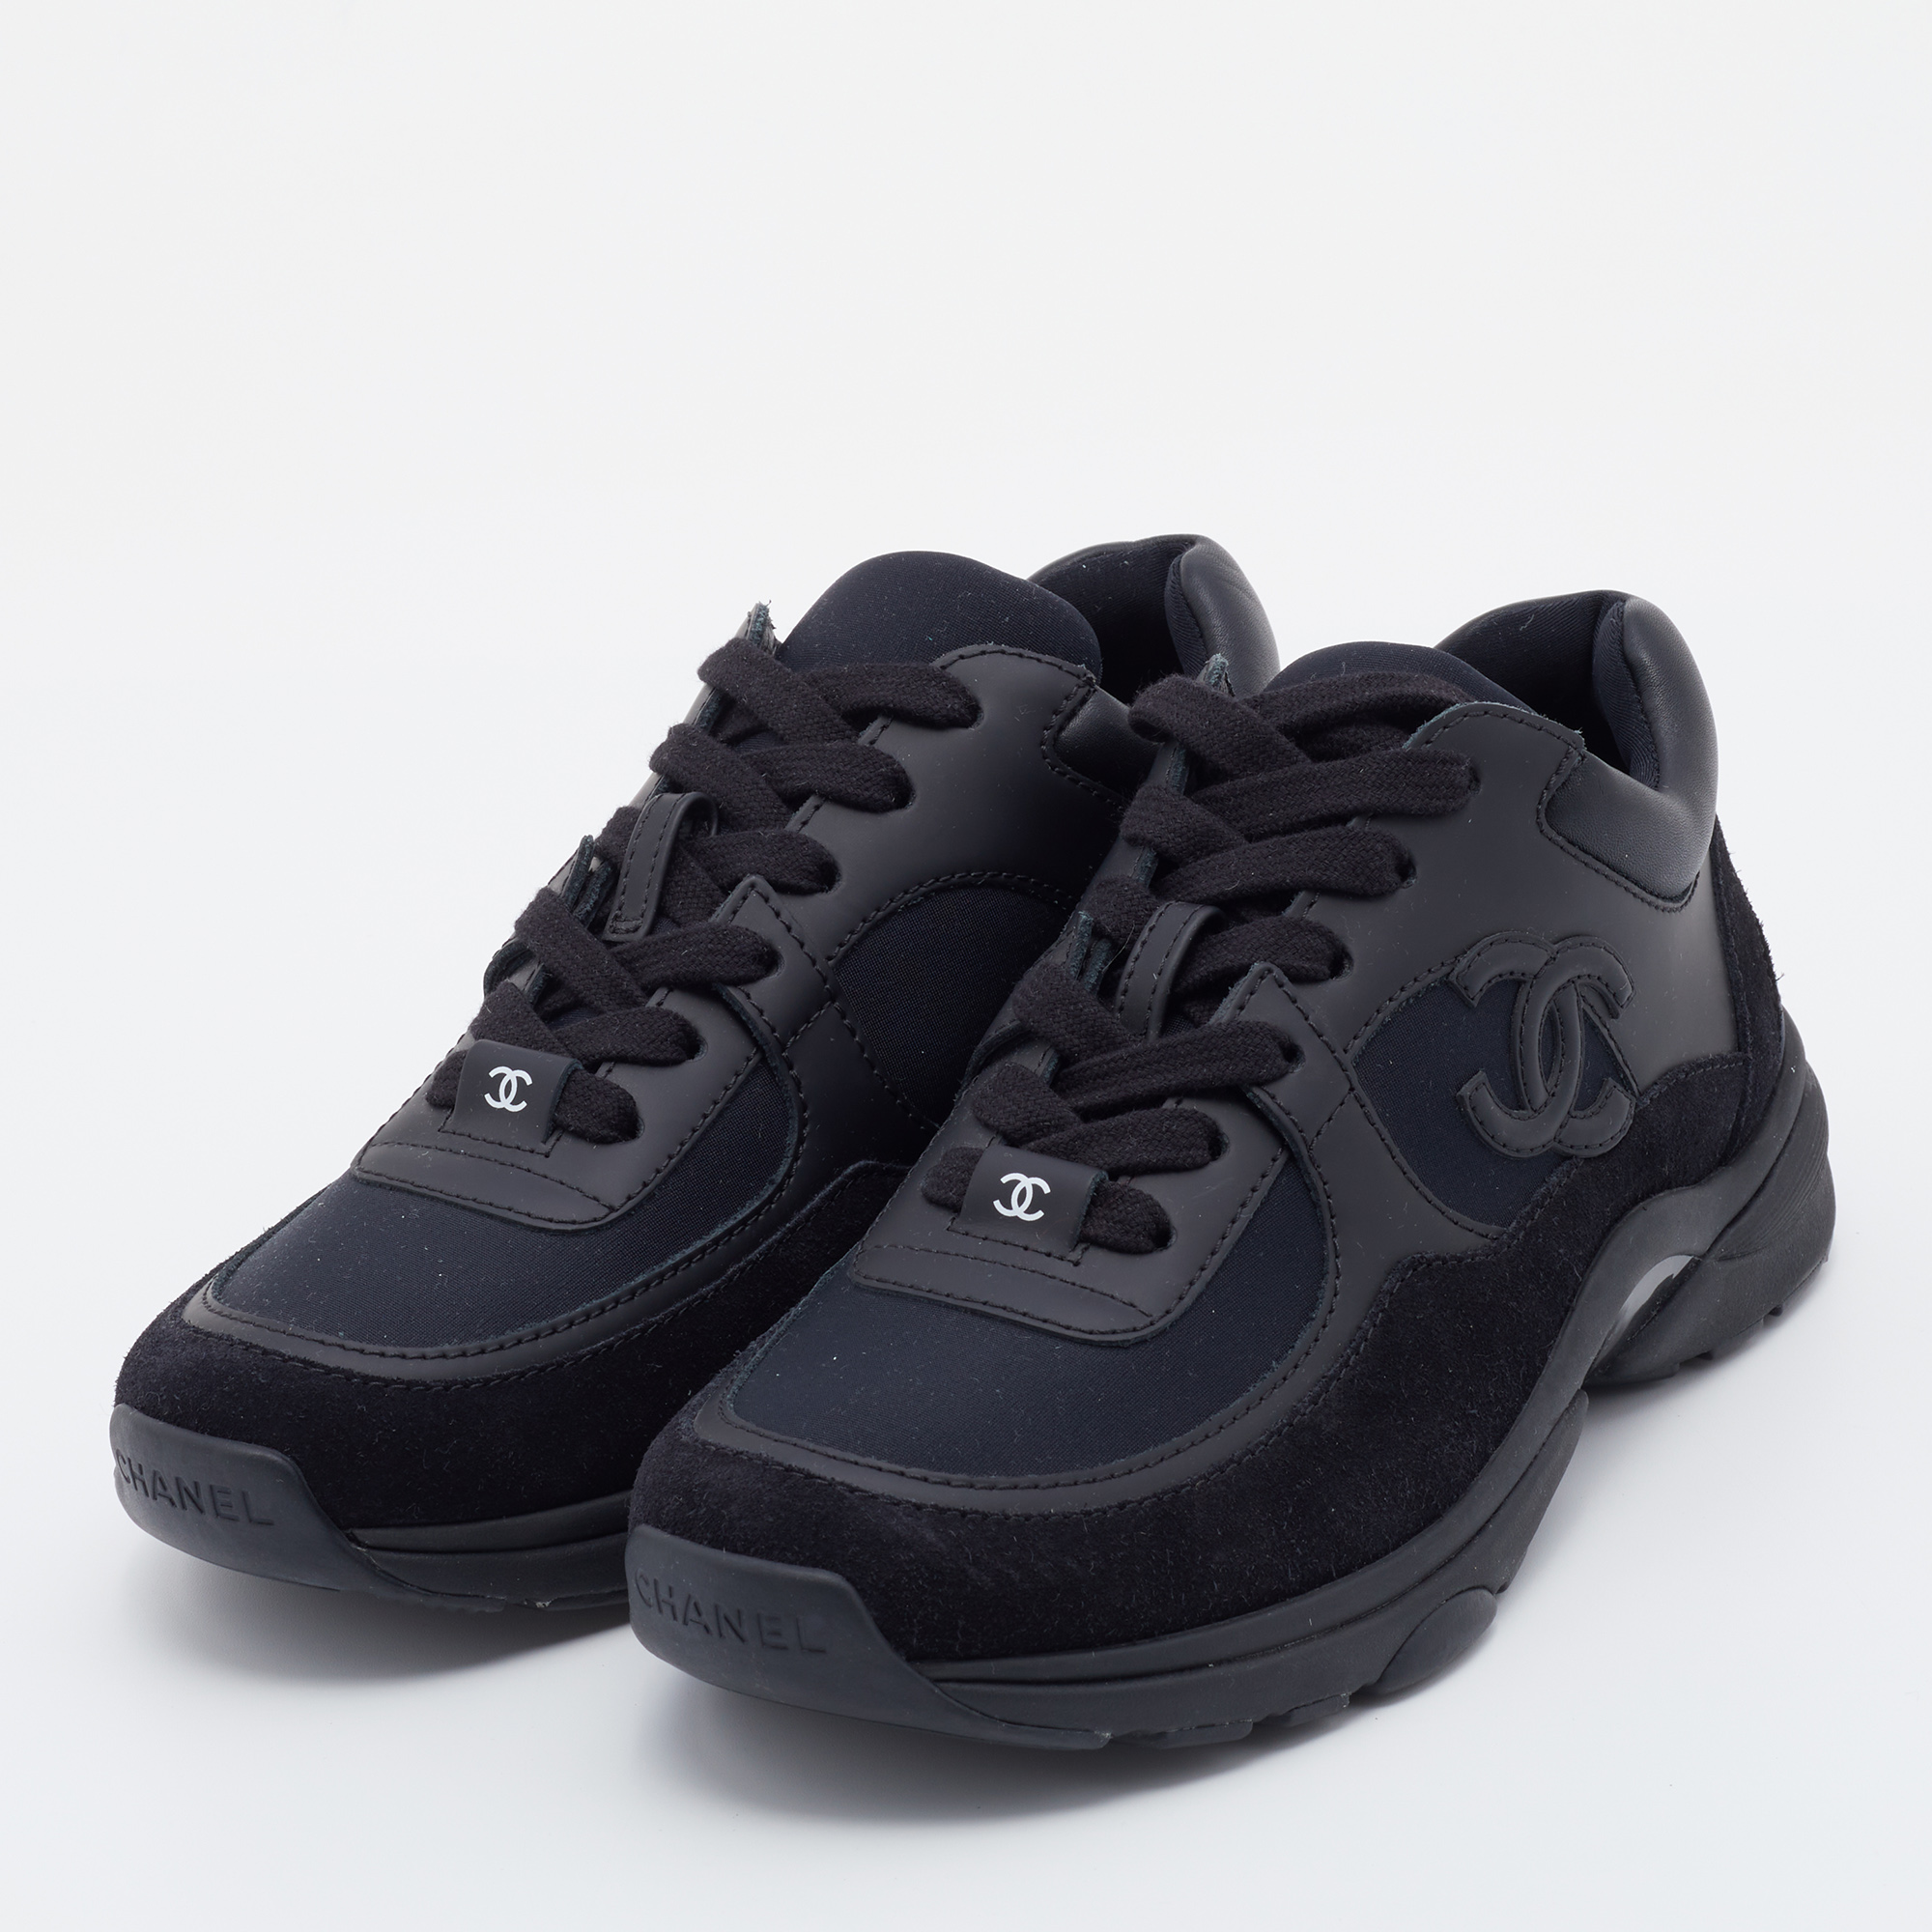 

Chanel Black Neoprene/Leather and Suede CC Lace-Up Sneakers Size